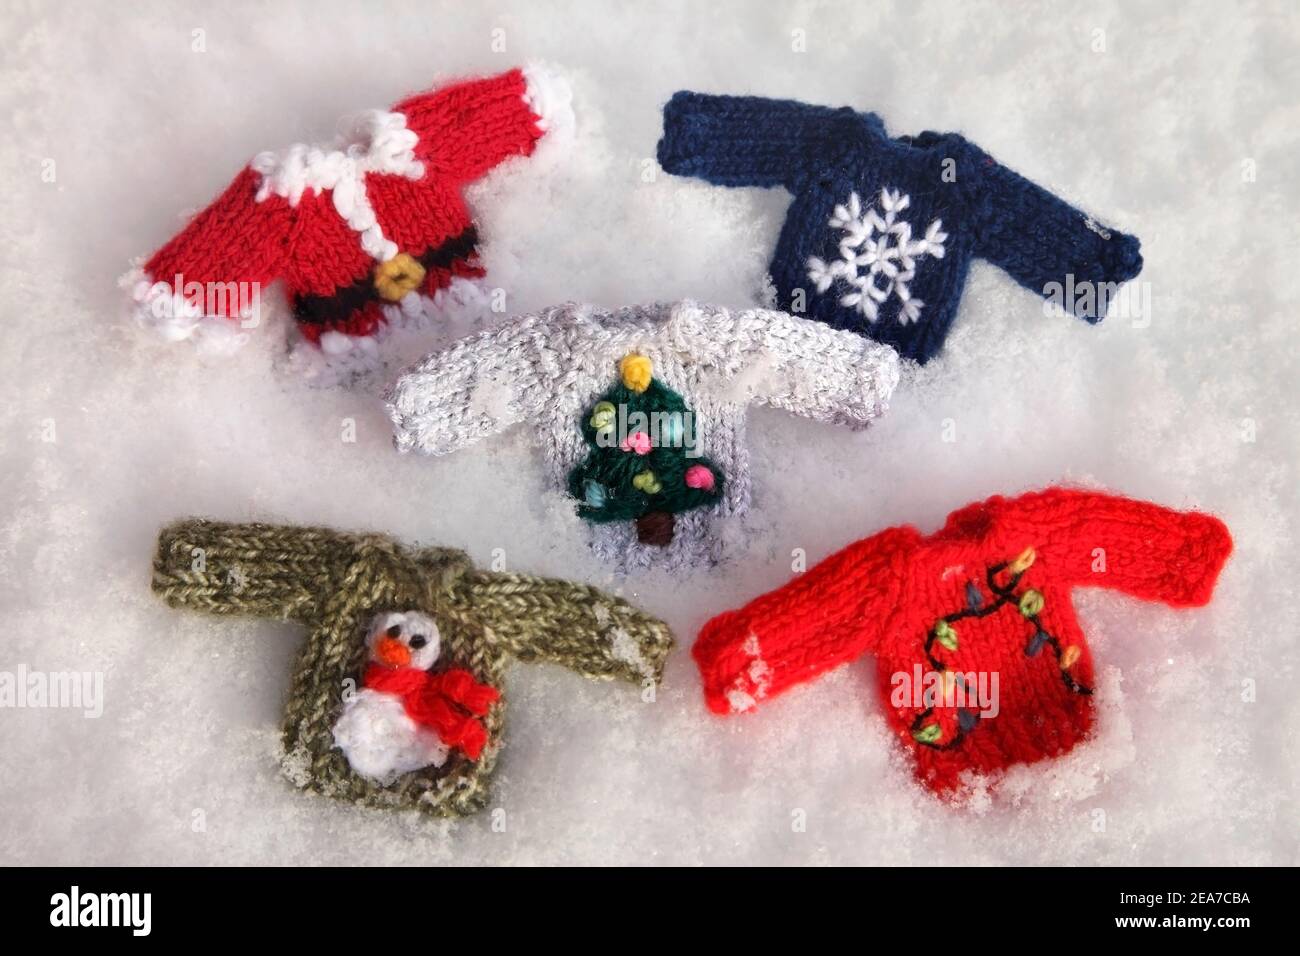 Selection of small knitted festive Christmas jumpers in the snow. Stock Photo